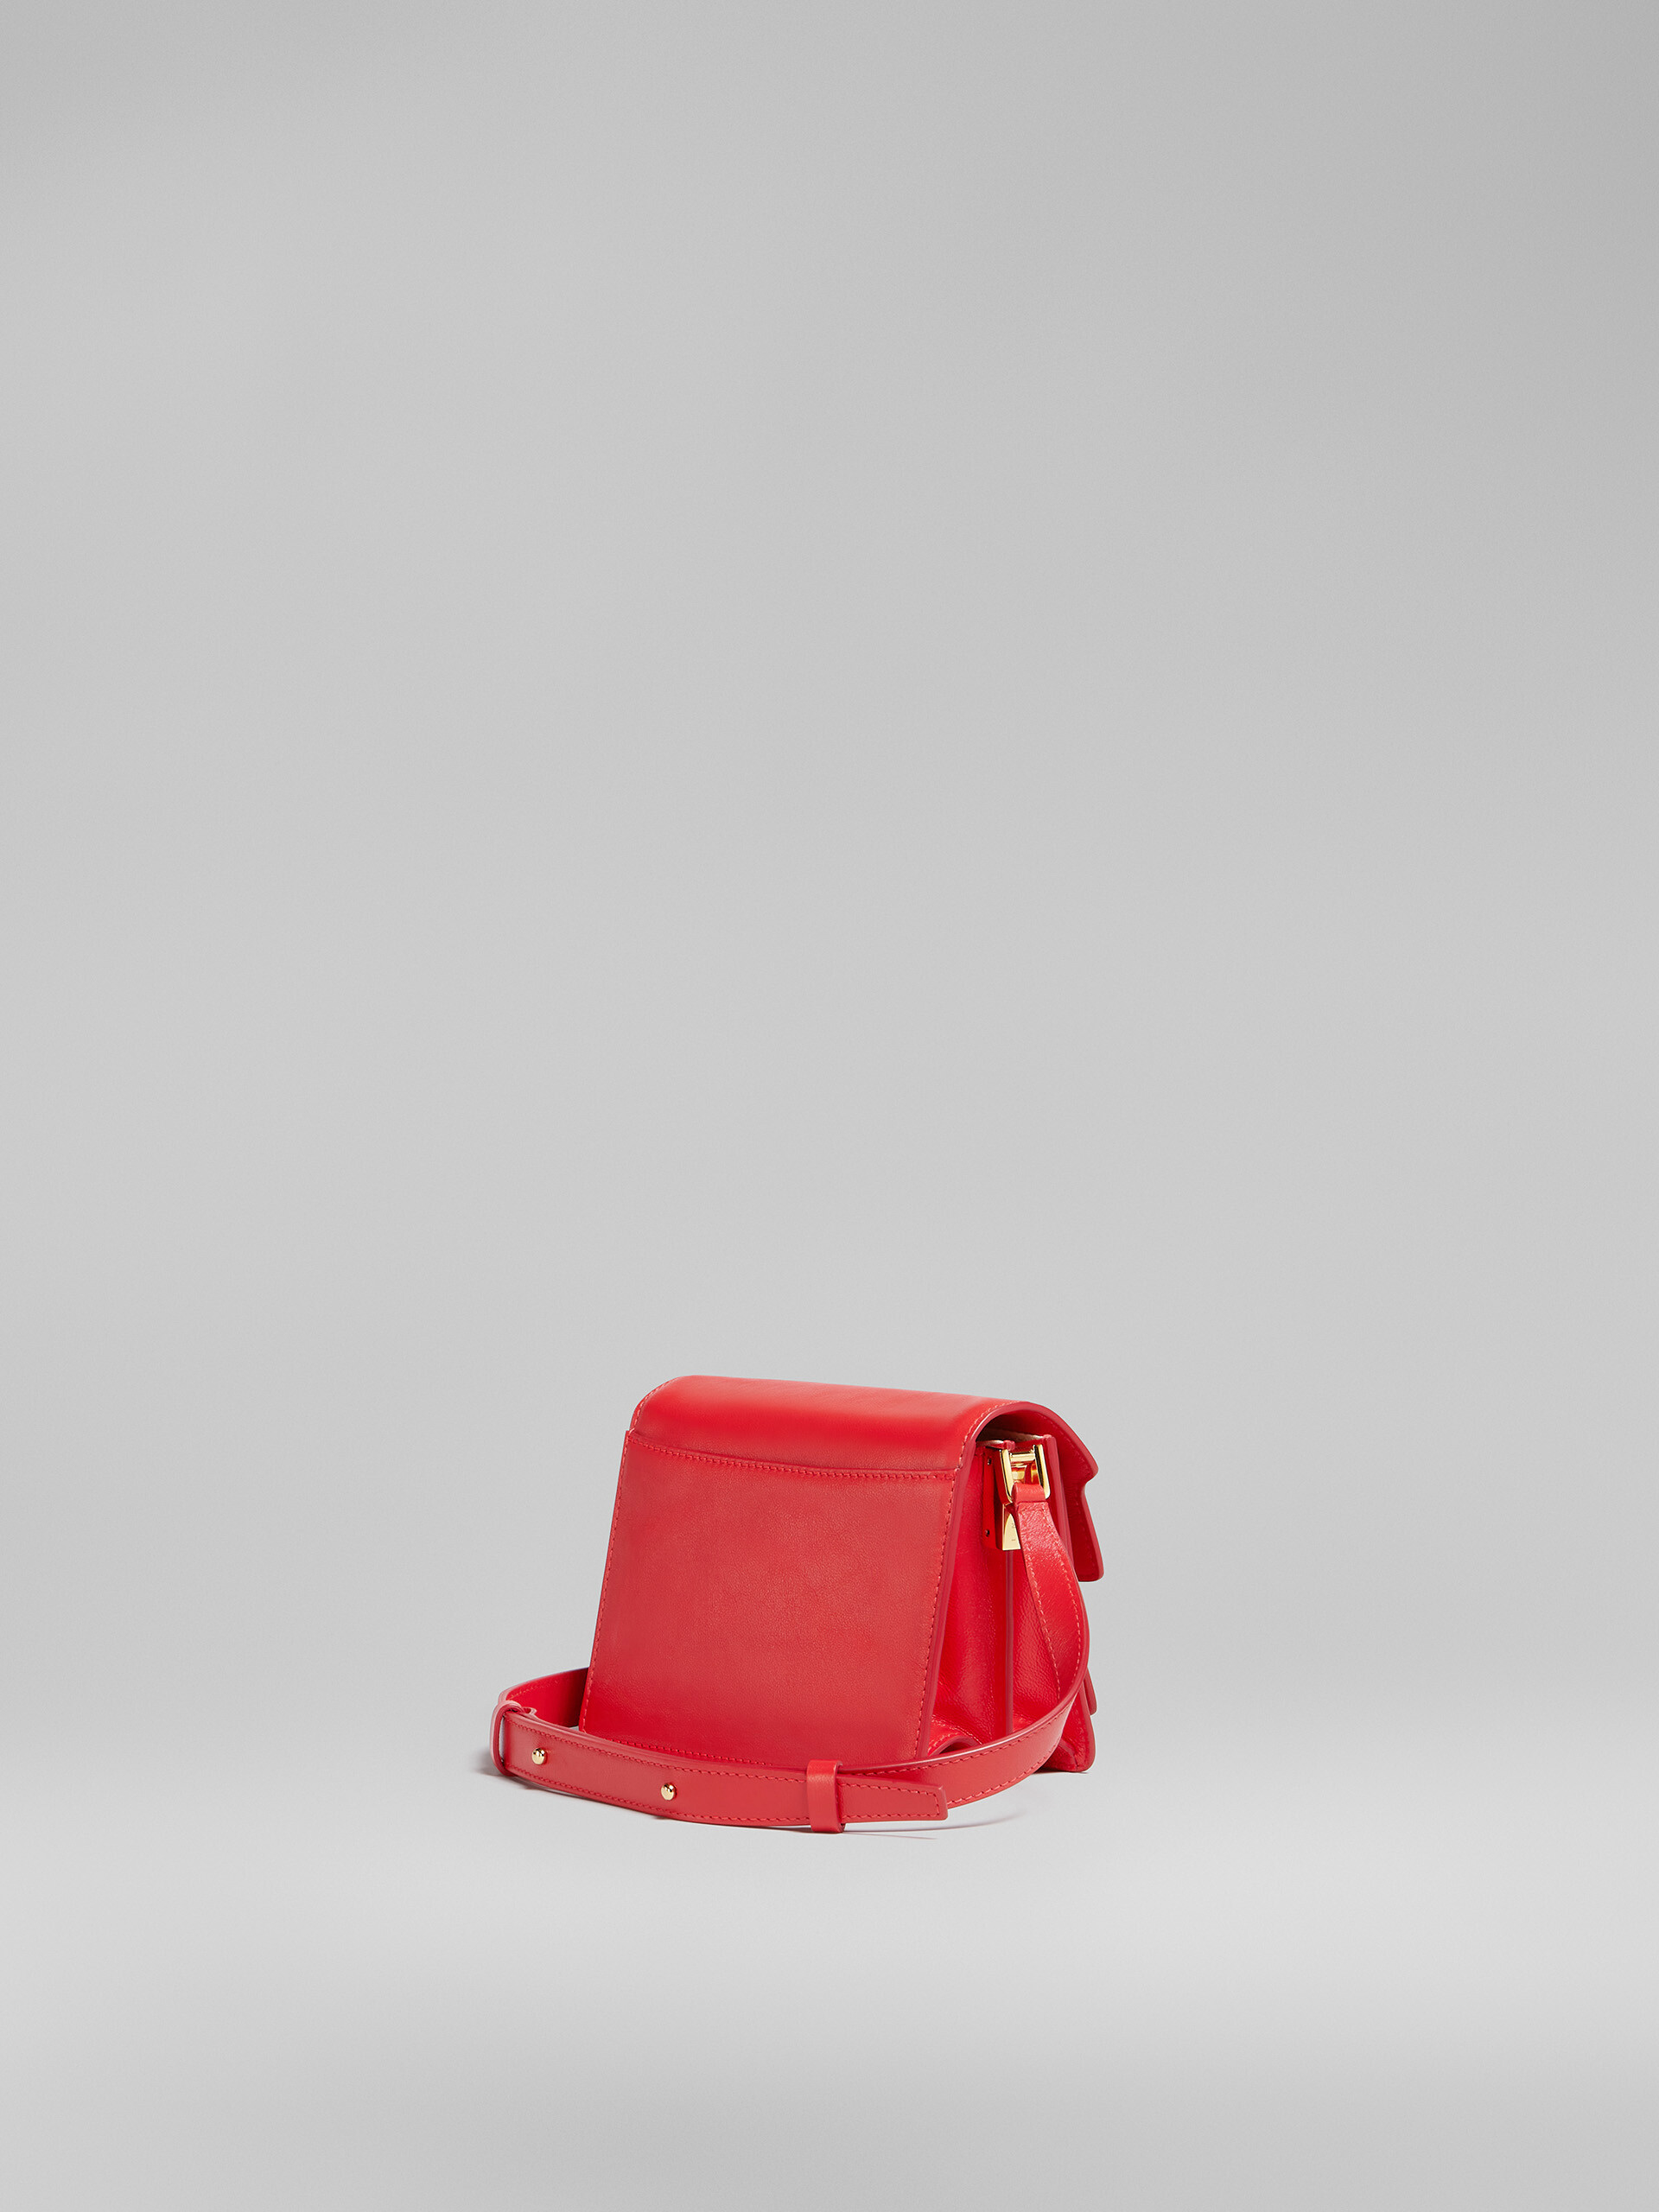 TRUNK SOFT mini bag in red leather - Shoulder Bags - Image 3